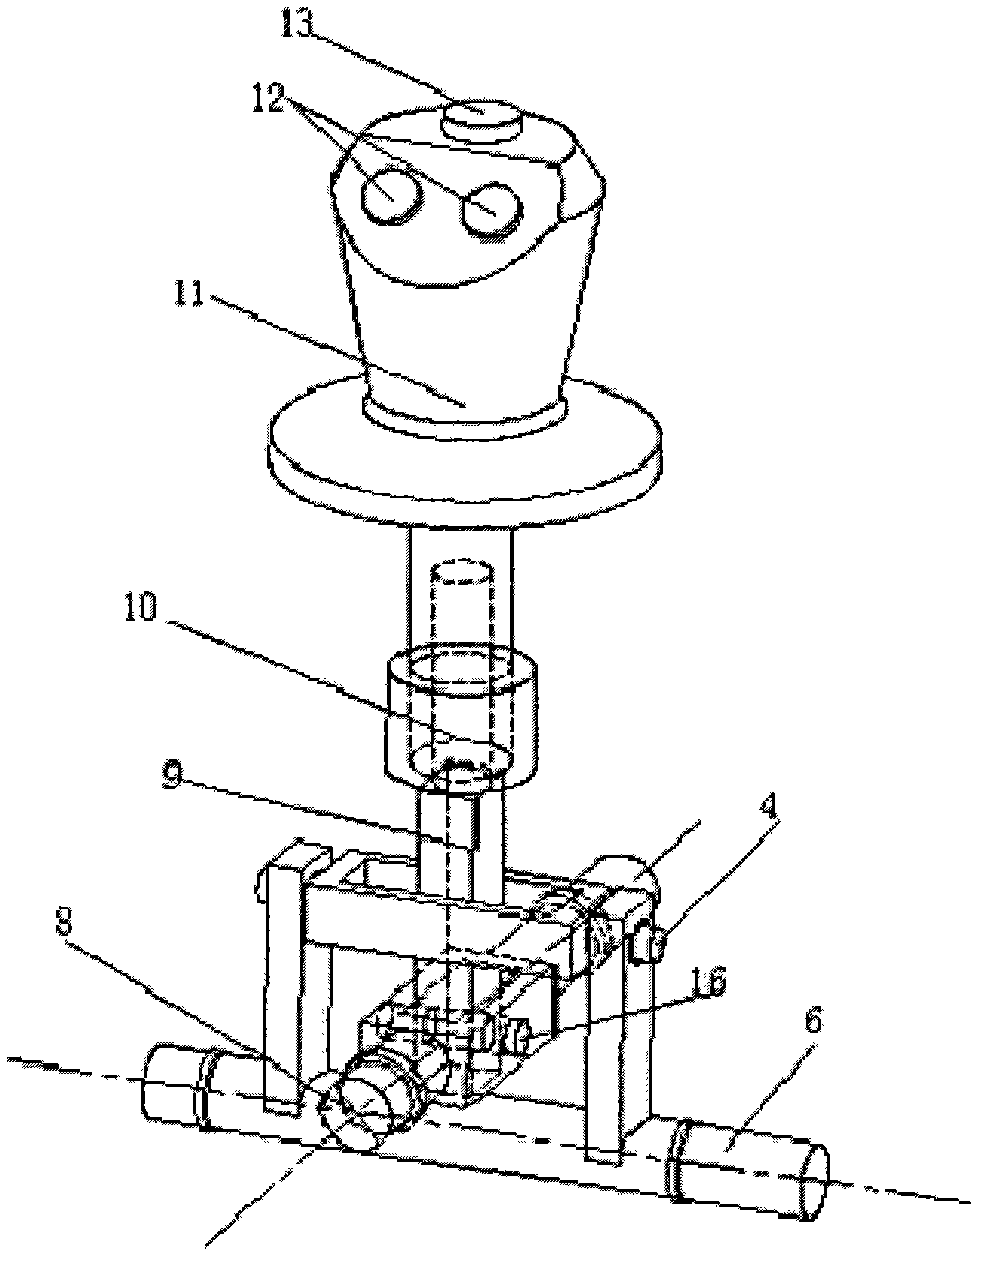 Automobile-line-control-system-based control lever device integrating steering, braking and speed change